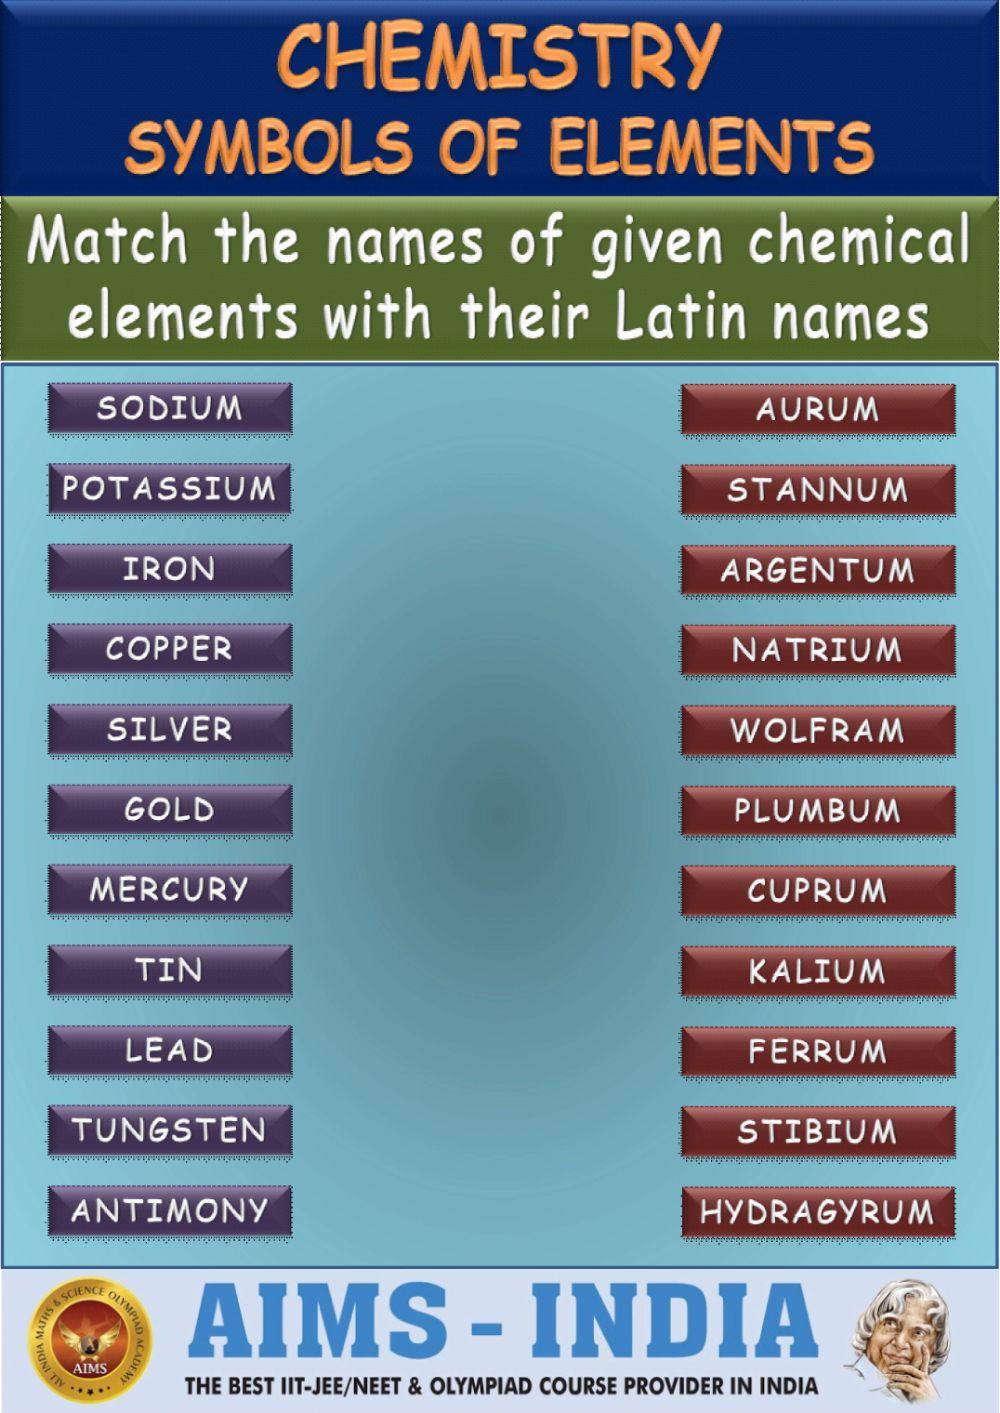 Elements names and their latin names